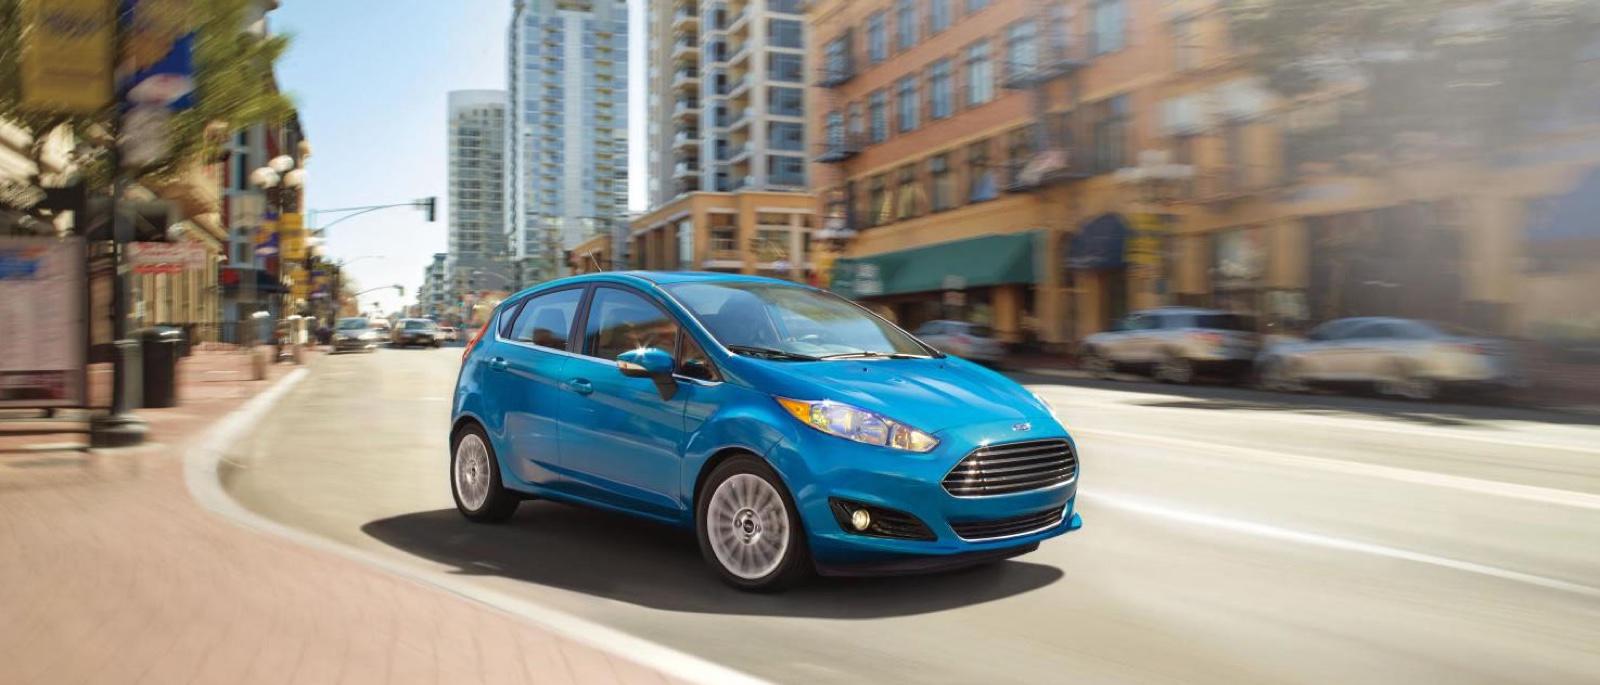 The 2016 Ford Fiesta MPG Ratings Are Amazing River View Ford